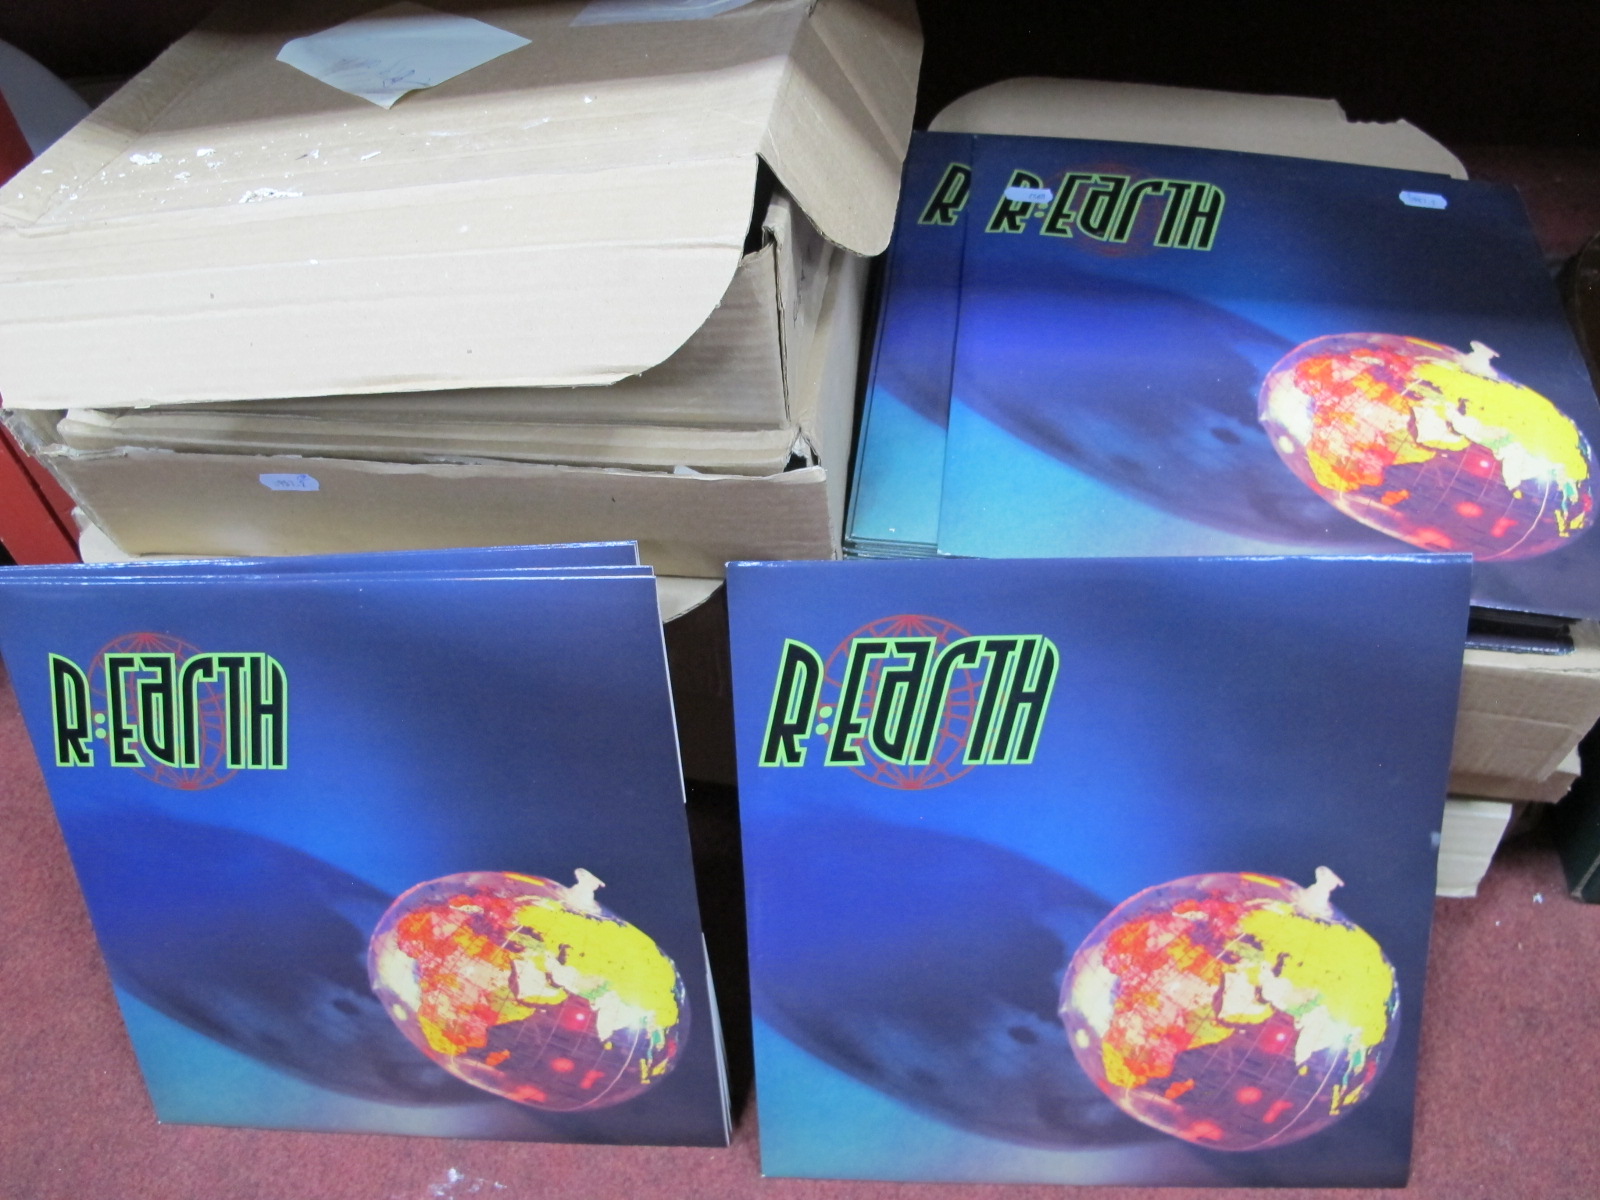 Eight Boxes R-Earth - R Earth Records. Manna records, designed by The River Cover photograph by R